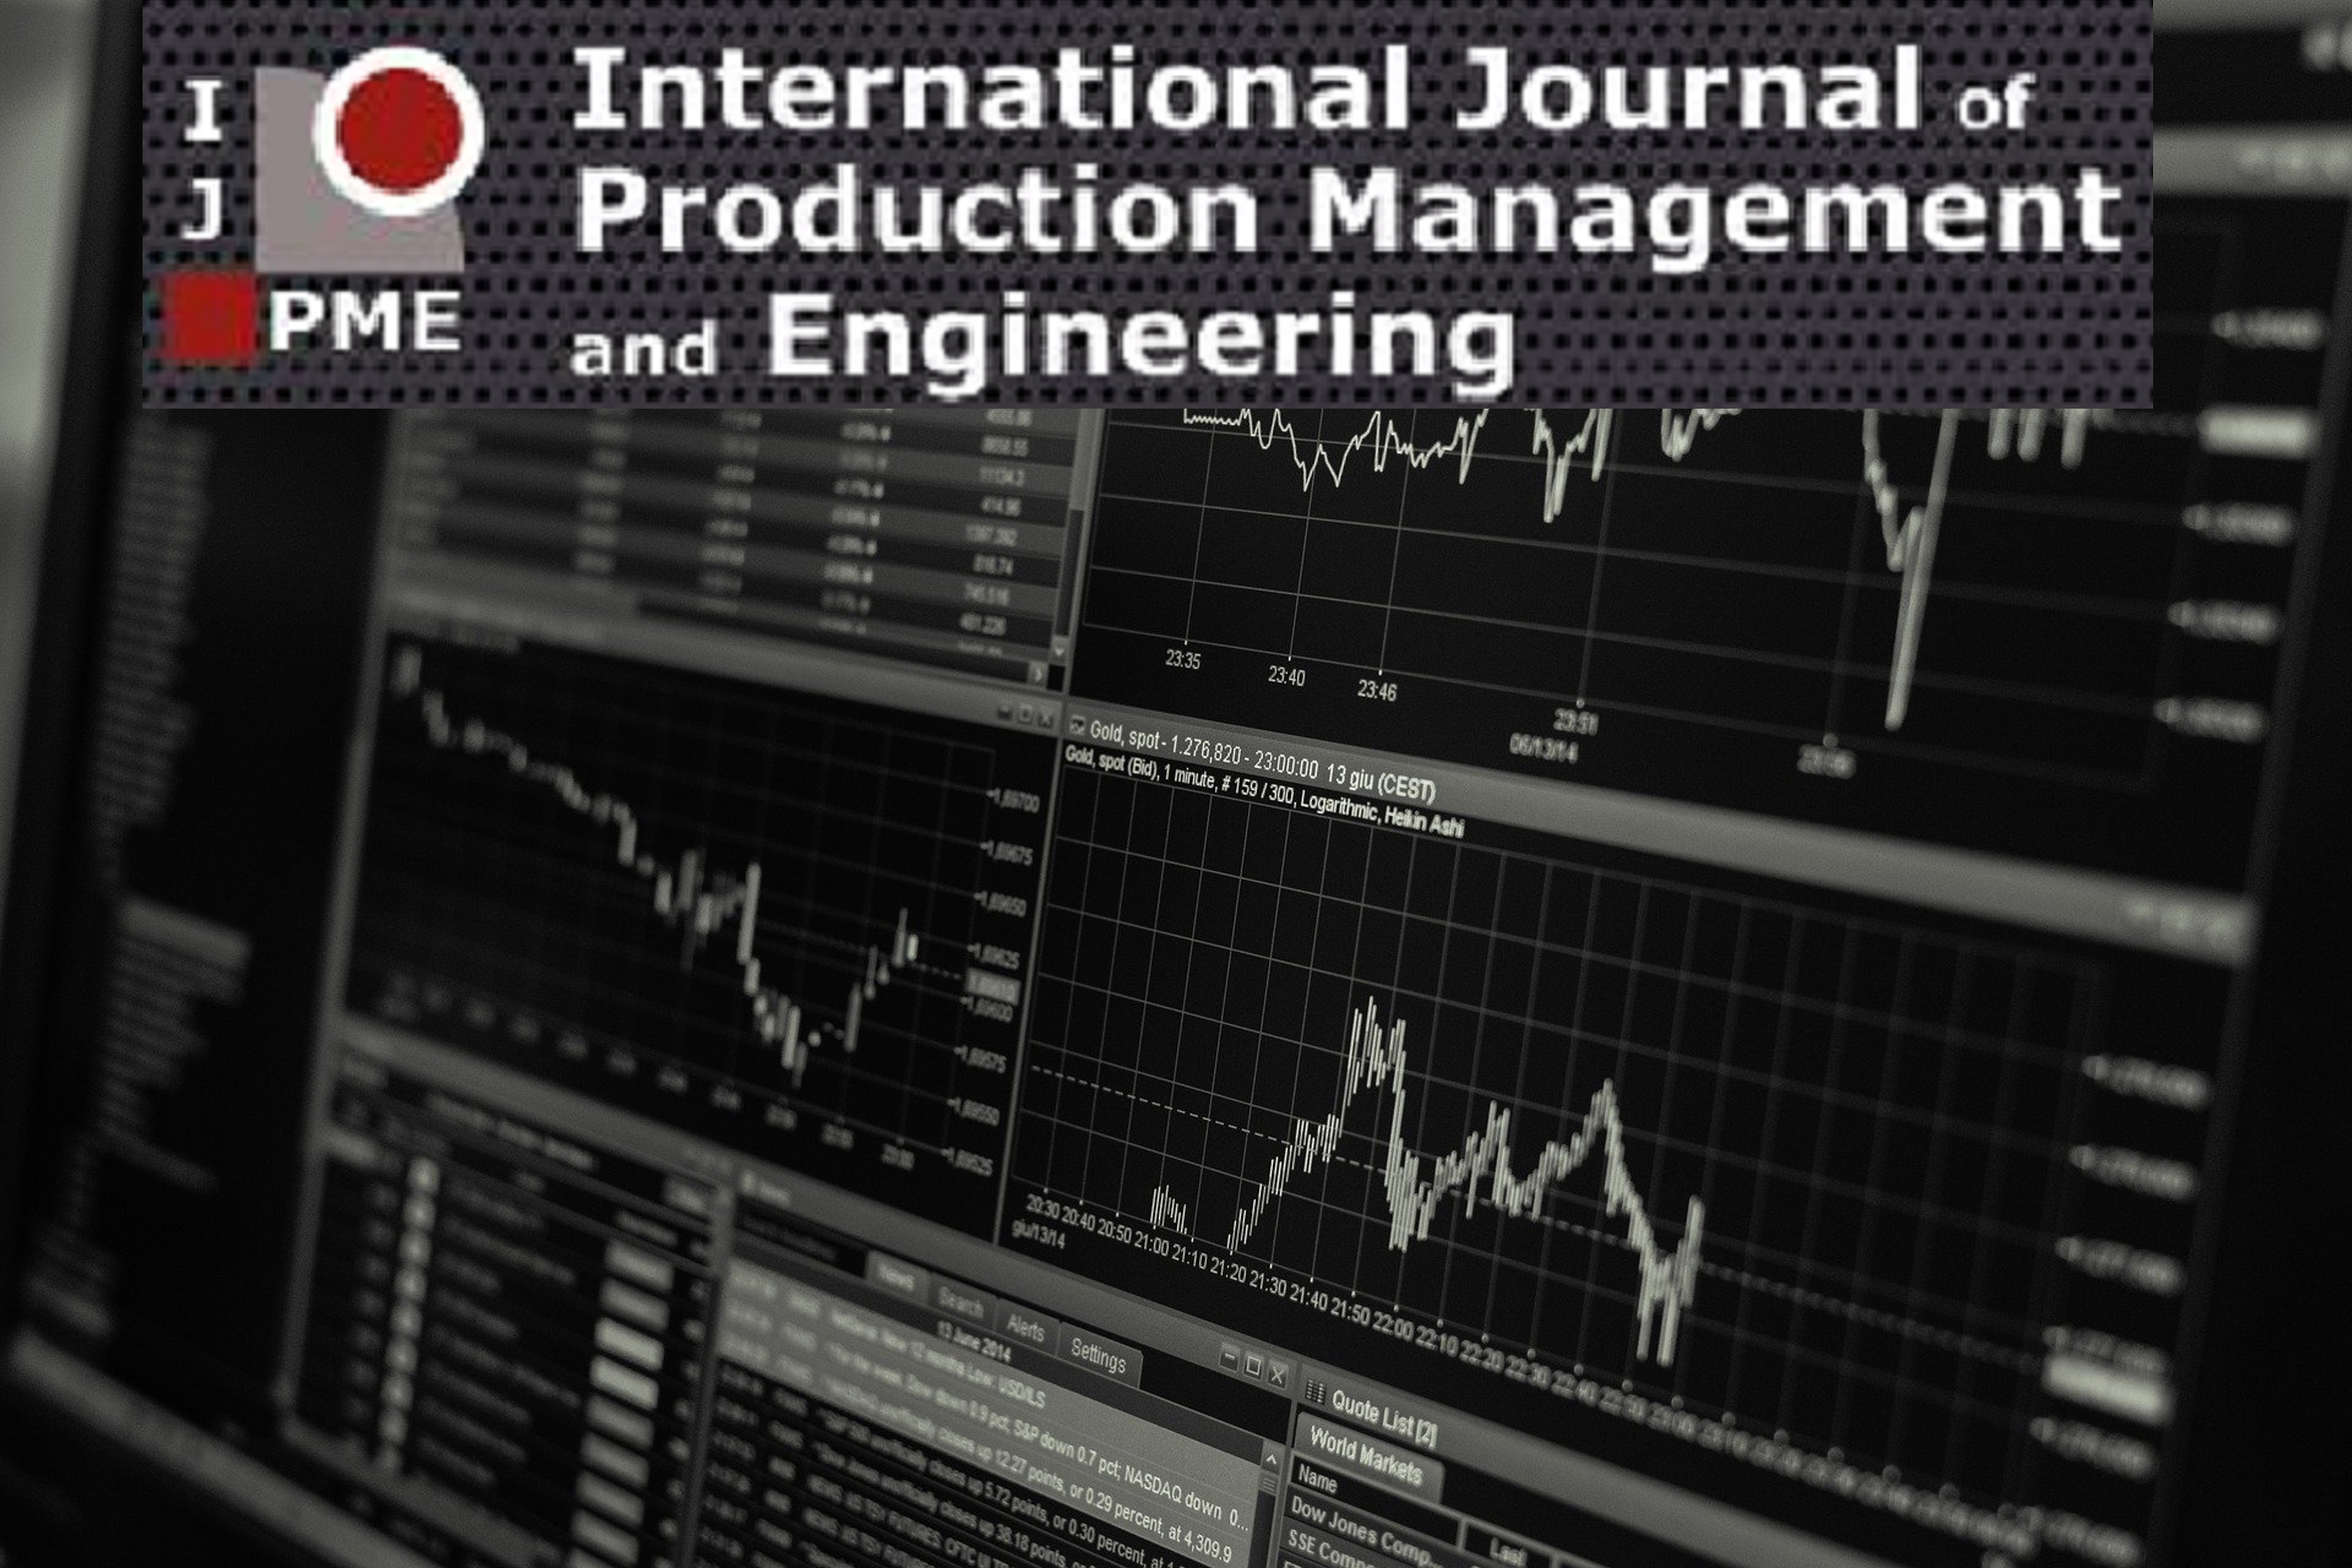 International Journal of Production Management and Engineering